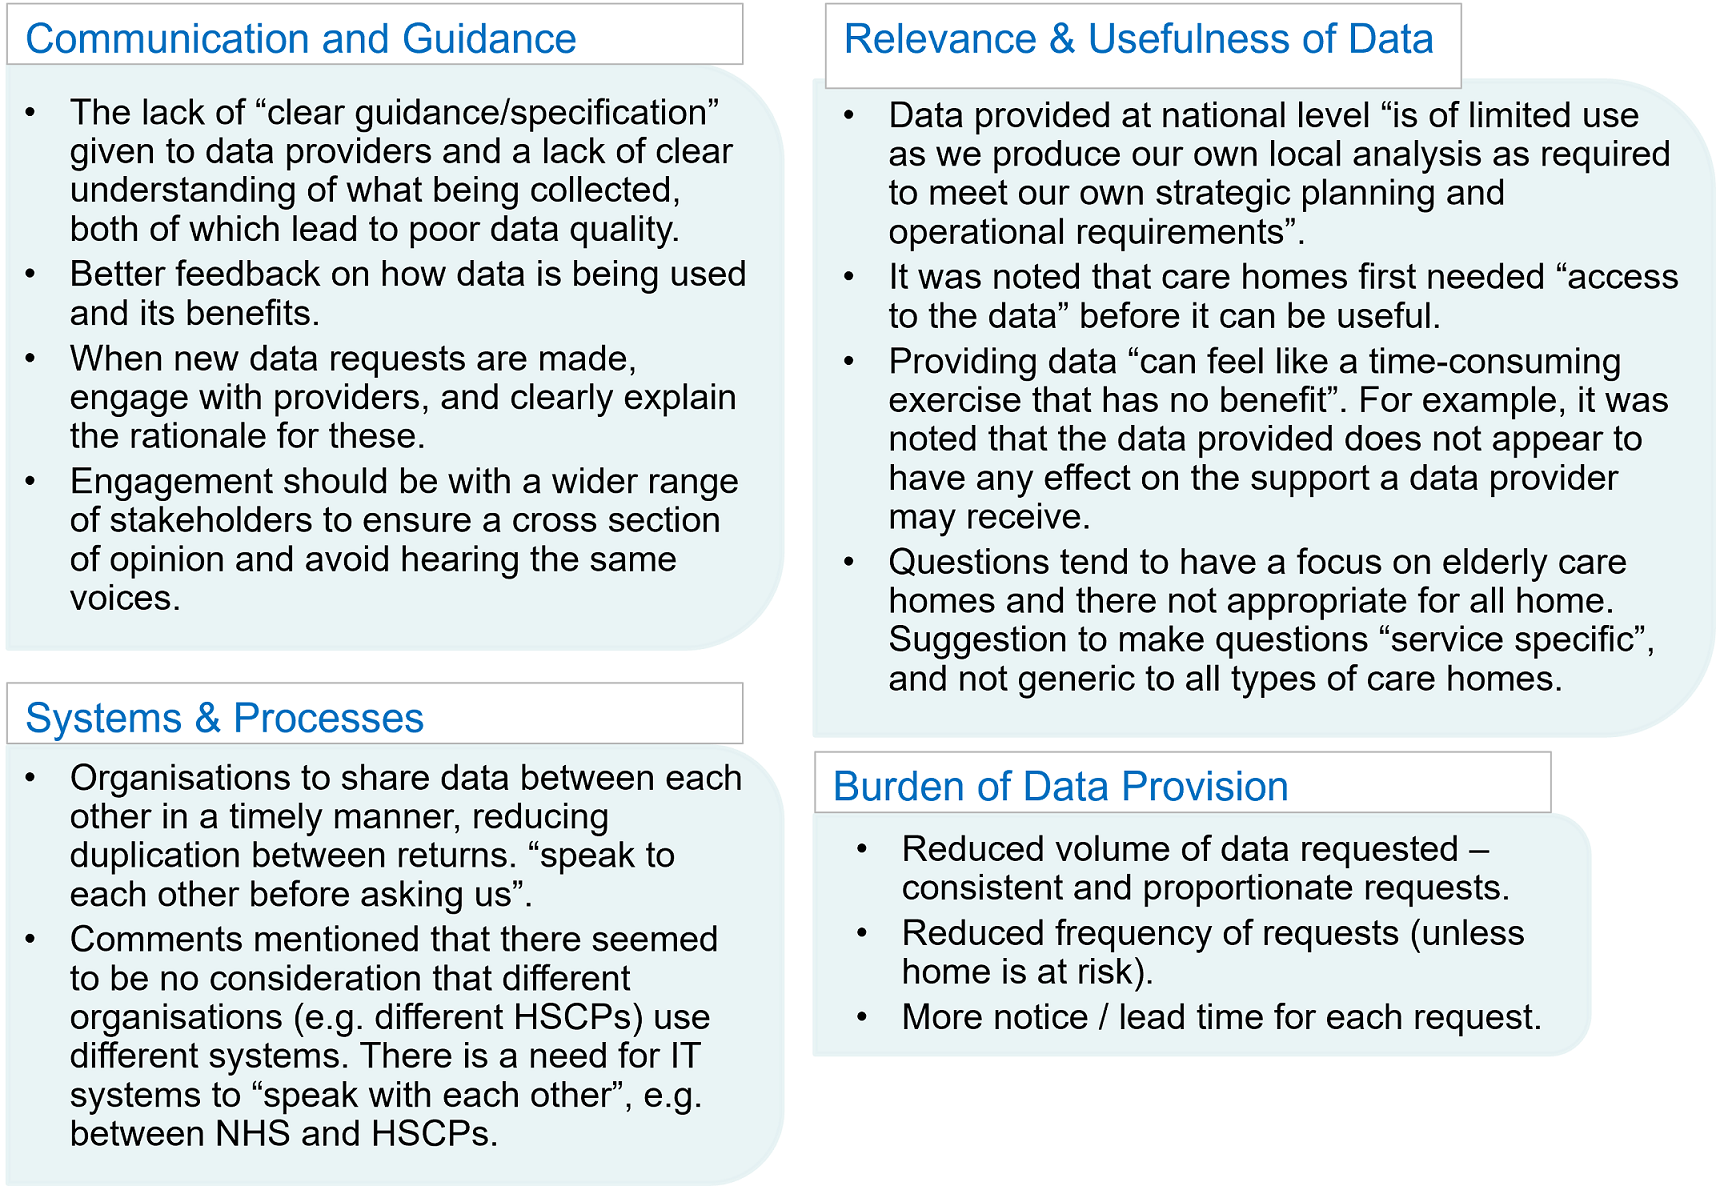 This image shows grouped examples of the 4 categories listed above. Communication and guidance:  • The lack of “clear guidance/specification” given to data providers and a lack of clear understanding of what being collected, both of which lead to poor data quality. • Better feedback on how data is being used and its benefits.  • When new data requests are made, engage with providers, and clearly explain the rationale for these.  • Engagement should be with a wider range of stakeholders to ensure a cross section of opinion and avoid hearing the same voices. Relevance and usefulness of data • Data provided at national level “is of limited use as we produce our own local analysis as required to meet our own strategic planning and operational requirements”. • It was noted that care homes first needed “access to the data” before it can be useful. • Providing data “can feel like a time-consuming exercise that has no benefit”. For example, it was noted that the data provided does not appear to have any effect on the support a data provider may receive. • Questions tend to have a focus on elderly care homes and there not appropriate for all home. Suggestion to make questions “service specific”, and not generic to all types of care homes. Systems and processes • Organisations to share data between each other in a timely manner, reducing duplication between returns. “speak to each other before asking us”. • Comments mentioned that there seemed to be no consideration that different organisations (e.g. different HSCPs) use different systems. There is a need for IT systems to “speak with each other”, e.g. between NHS and HSCPs. Burden of data provision • Reduced volume of data requested – consistent and proportionate requests. • Reduced frequency of requests (unless home is at risk). • More notice / lead time for each request.